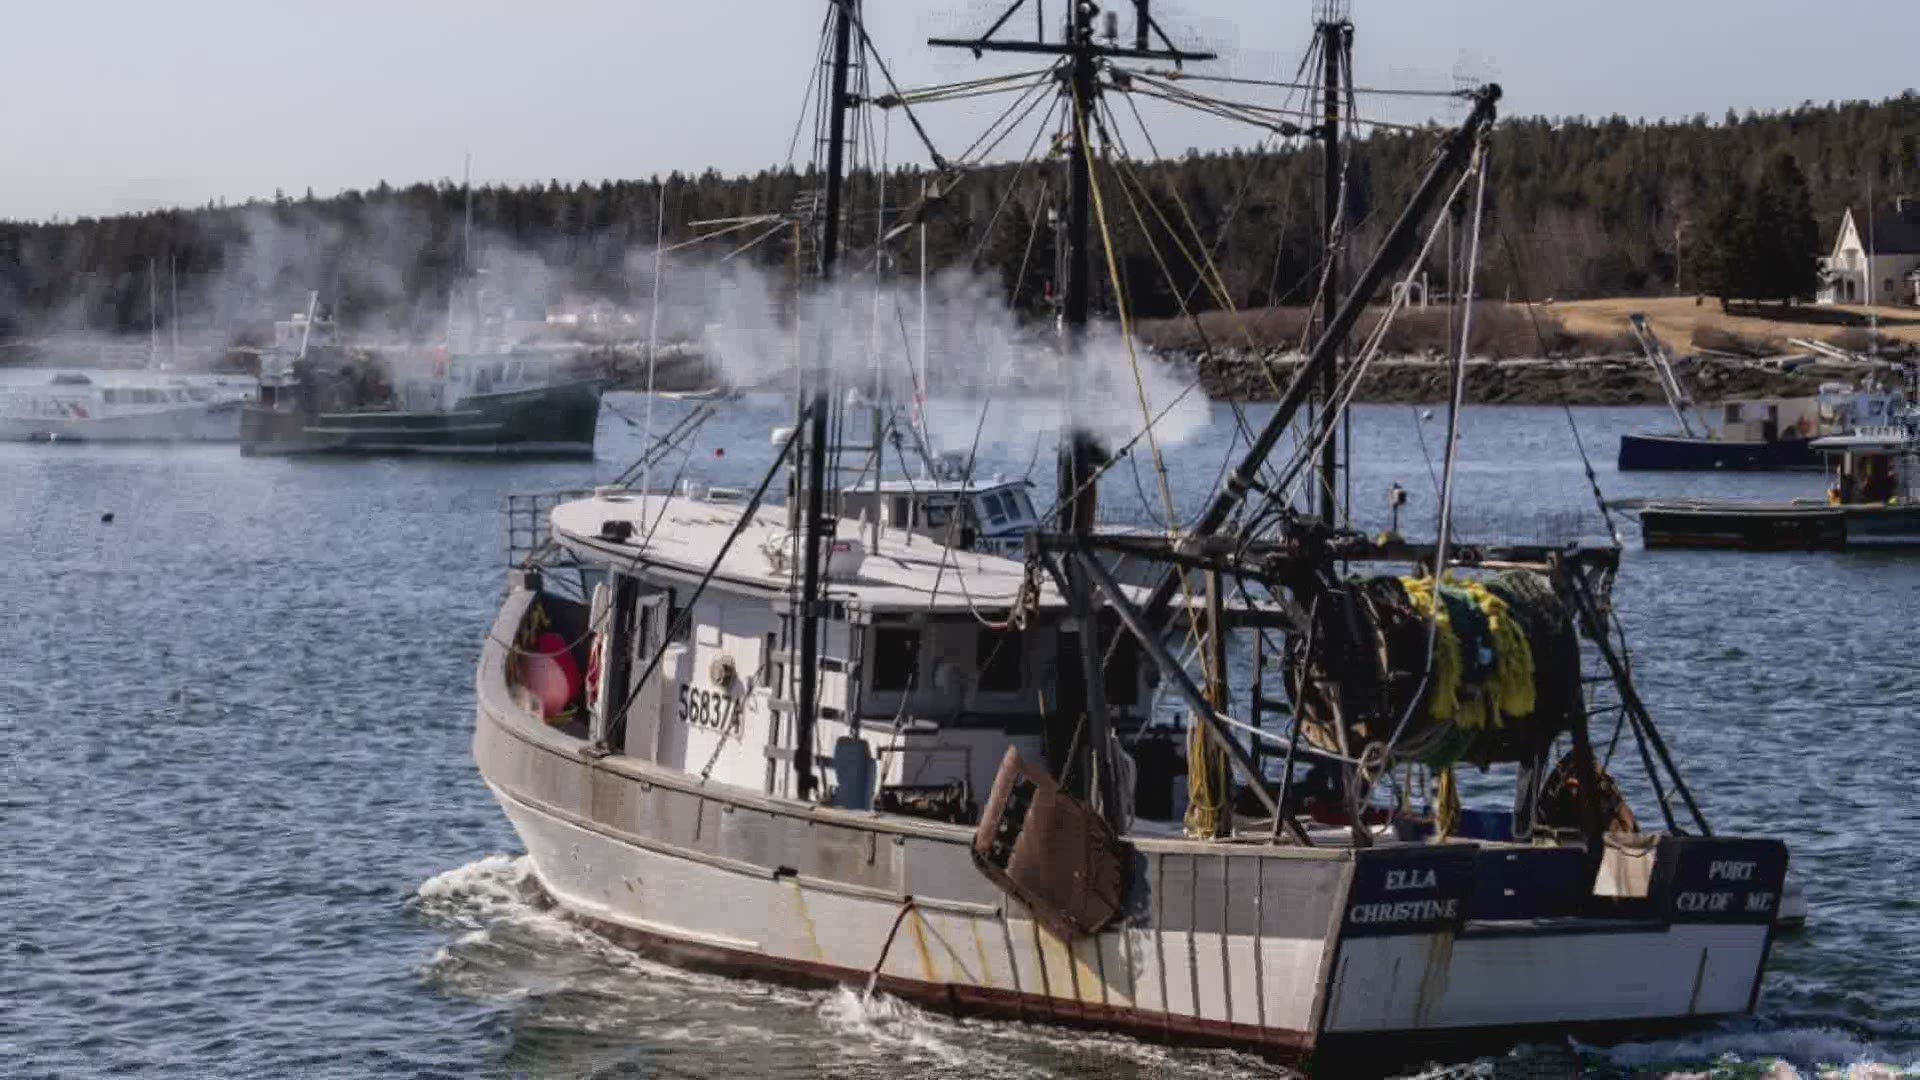 “Down East” looks at the daunting challenges groundfishermen now face.